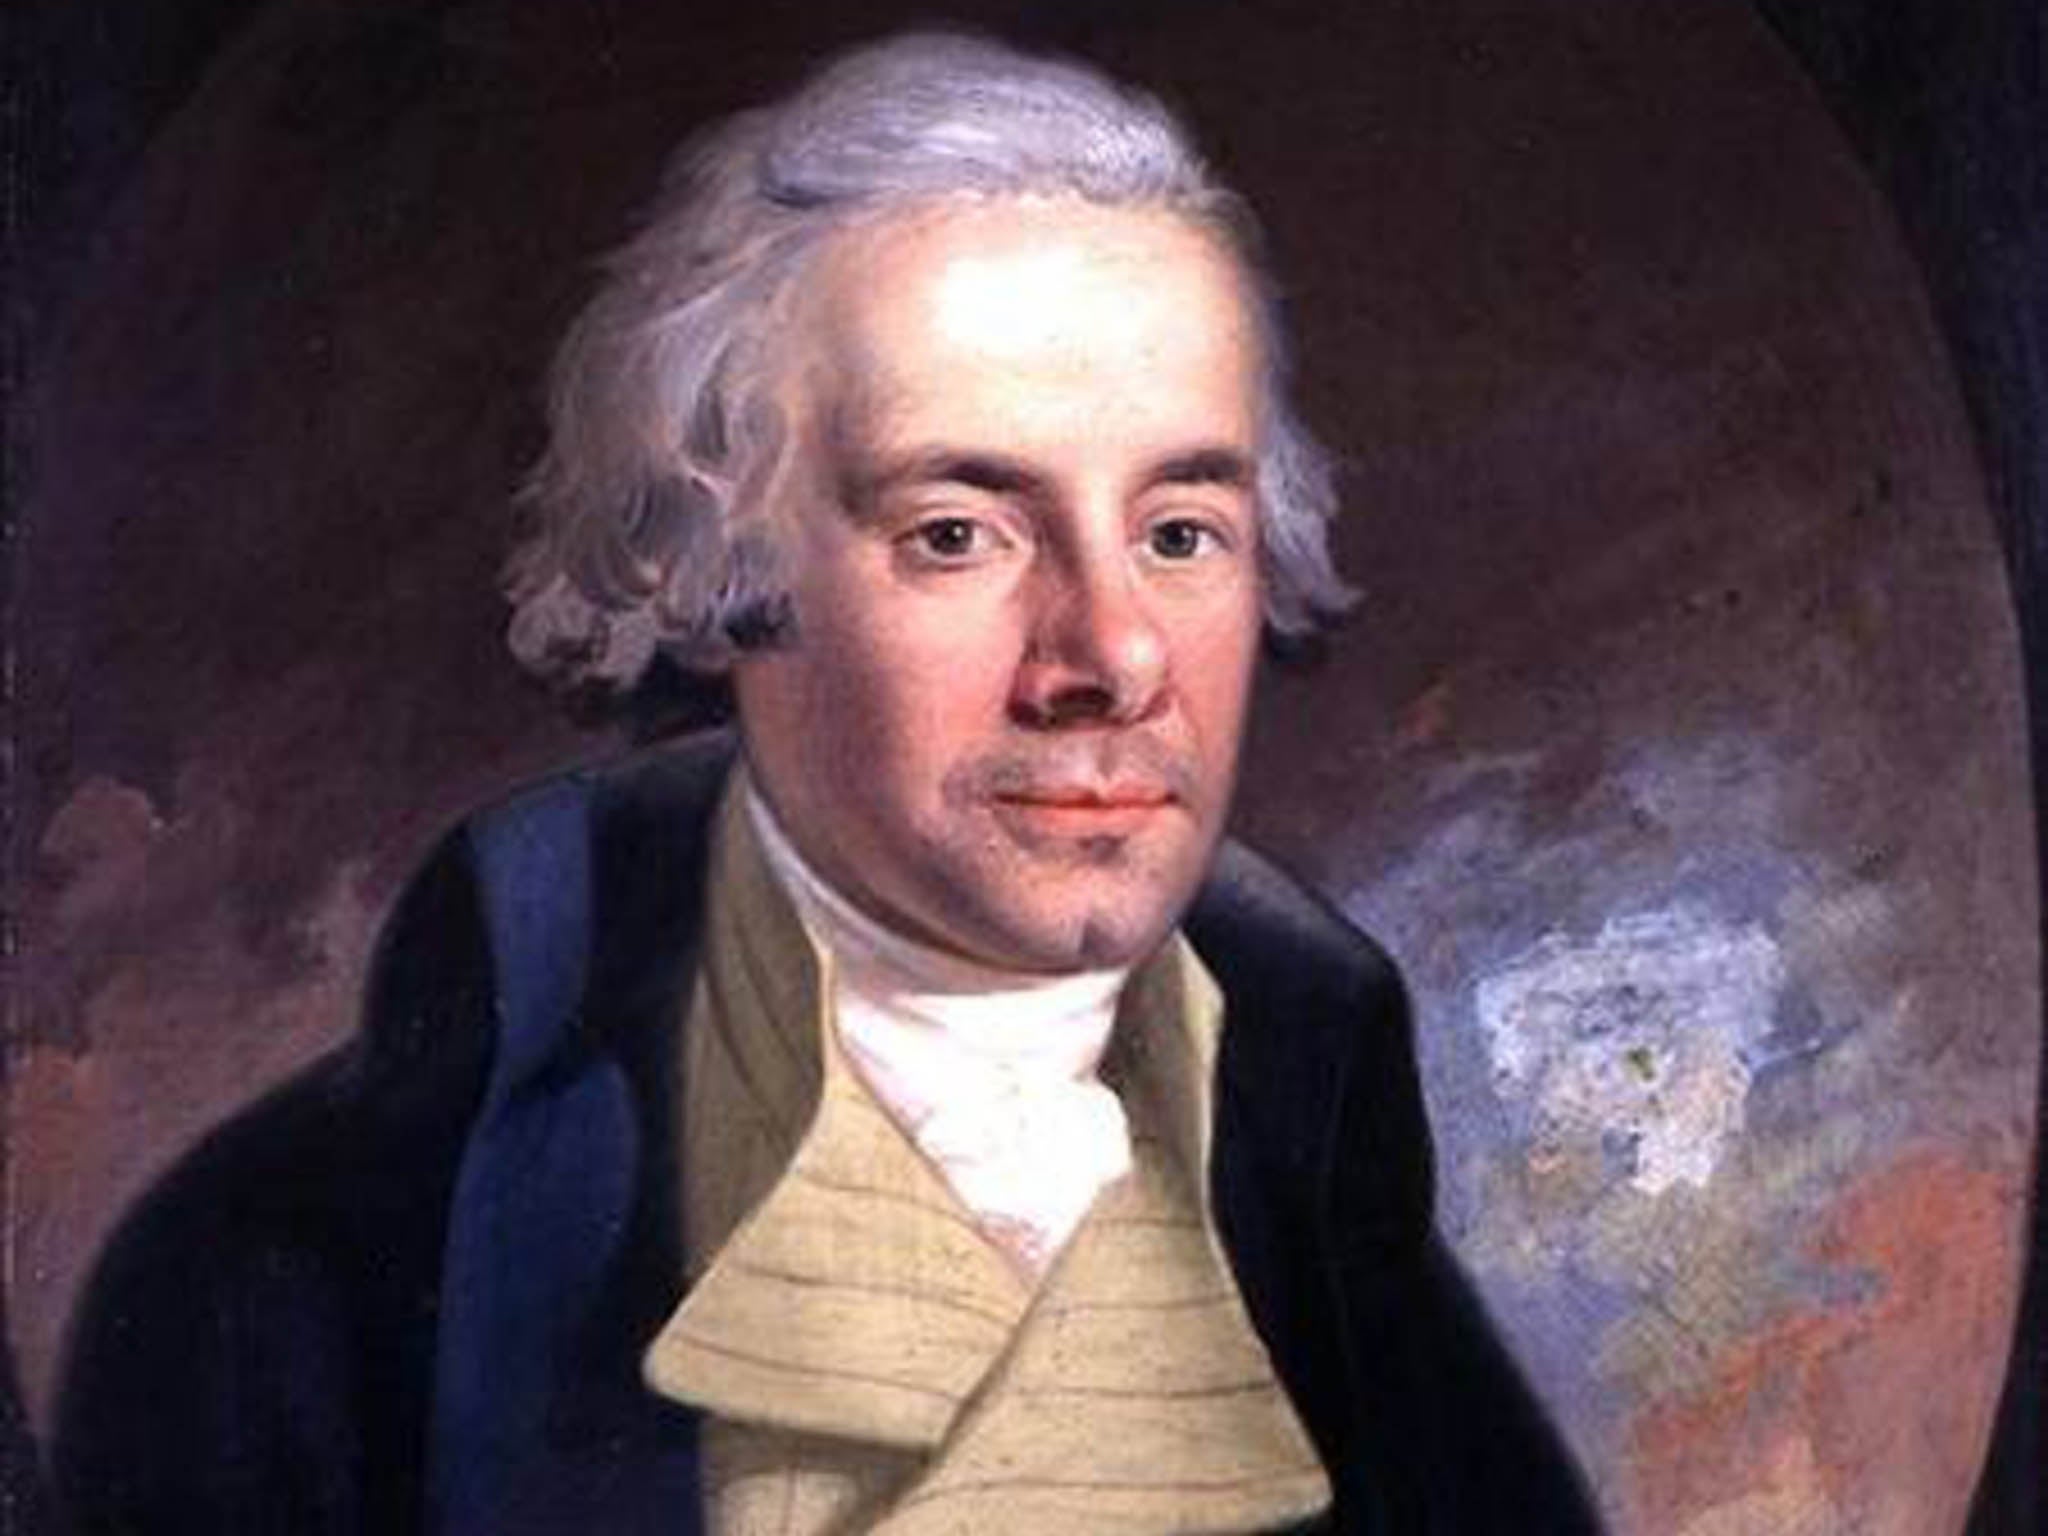 Theresa May recently paid tribute to pioneering anti-slavery campaigner, William Wilberforce